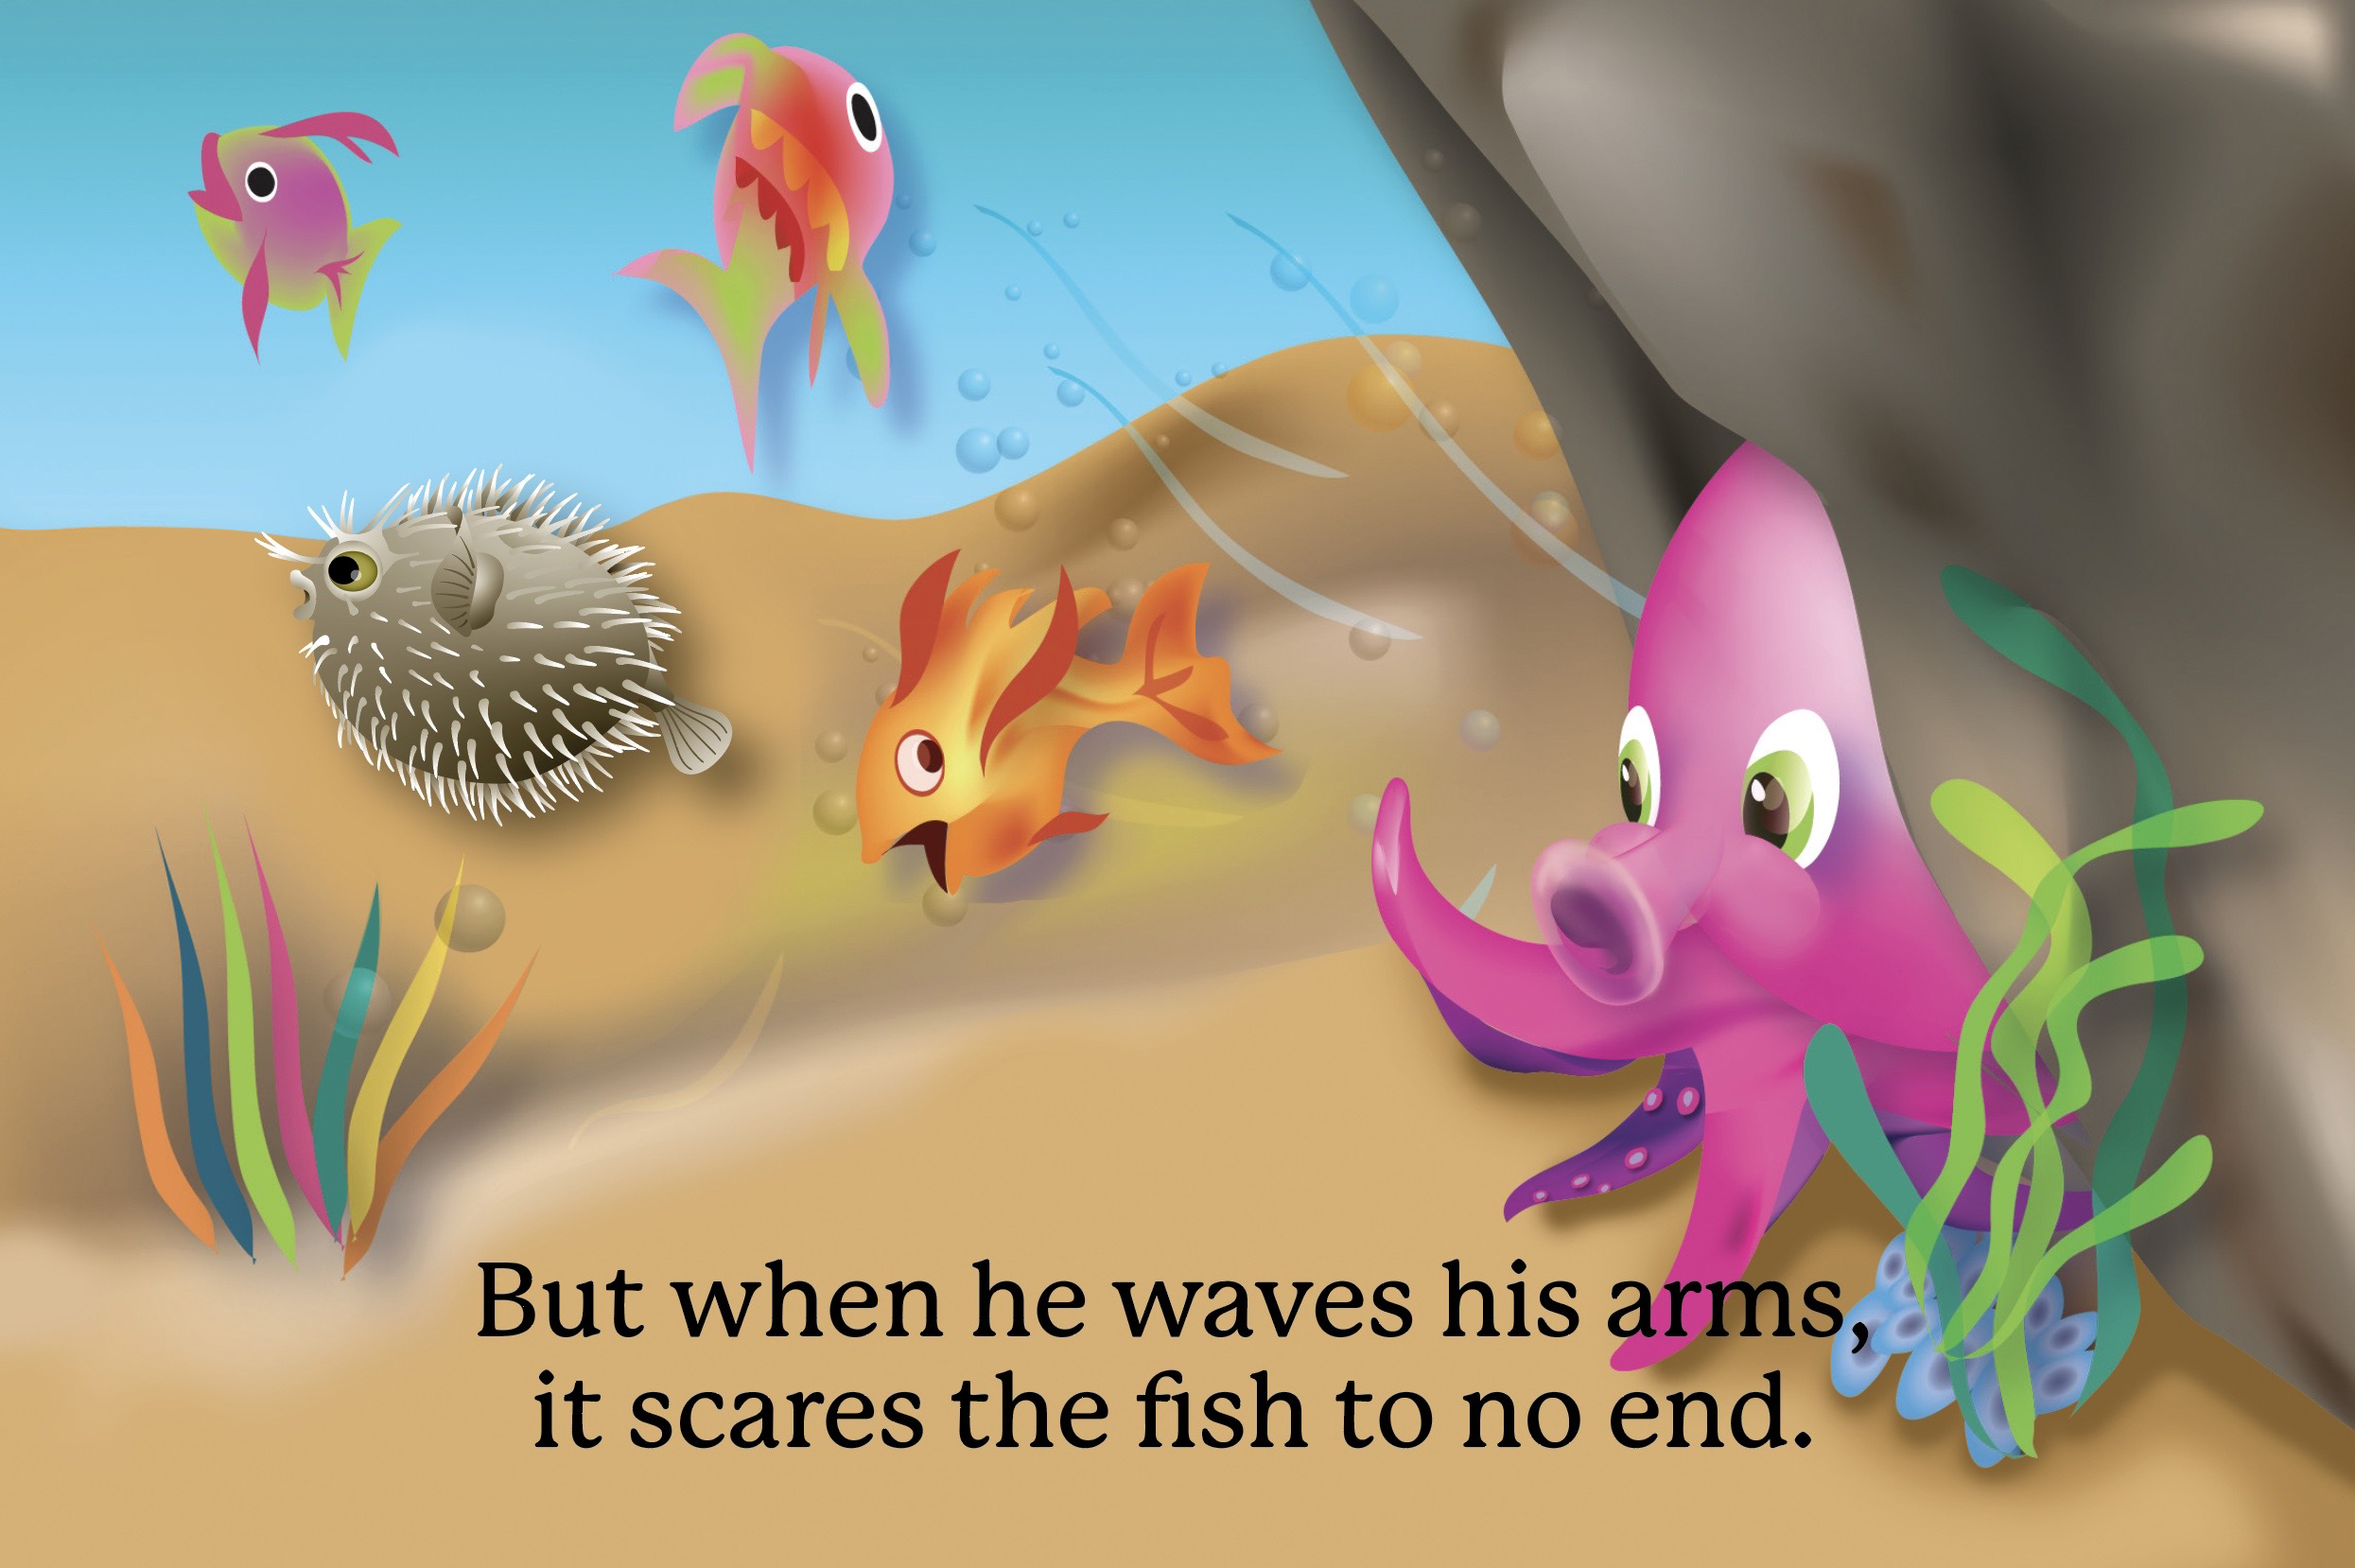 slide 4 Educational Children's Stories - Oliver the Octopus, by Bonnie Lady Lee. [Excerpt] Don't you see, we have something in common - many arms to extend!